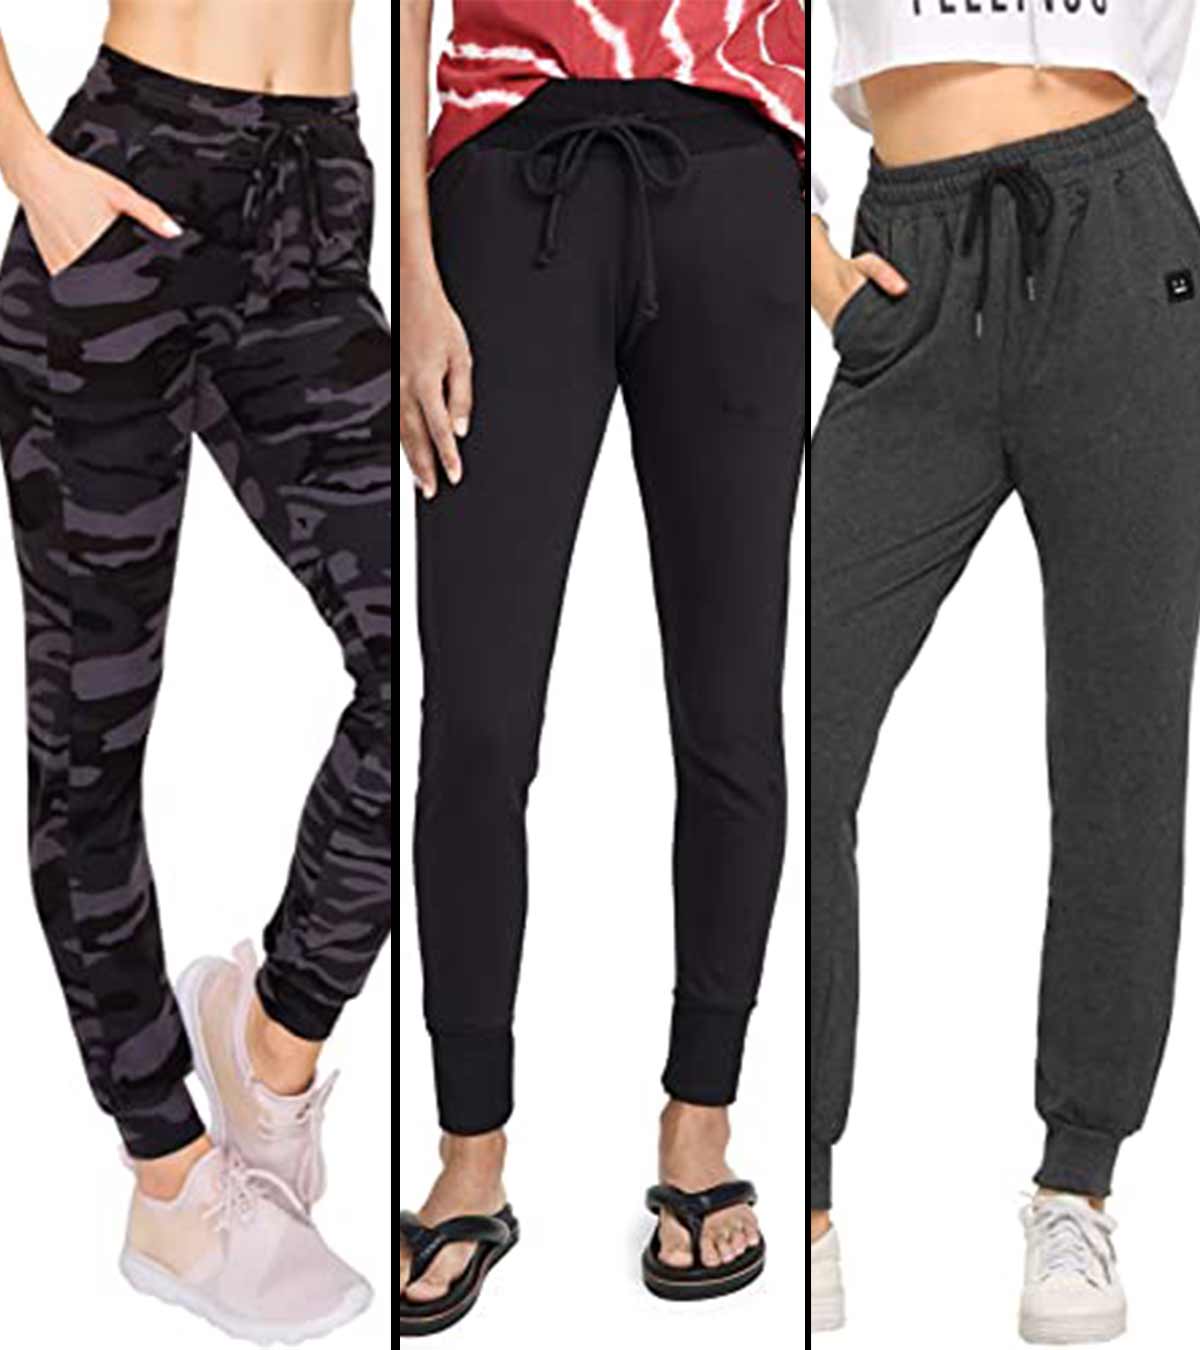 15 Best Sweatpants For Women To Wear At Home In 2023